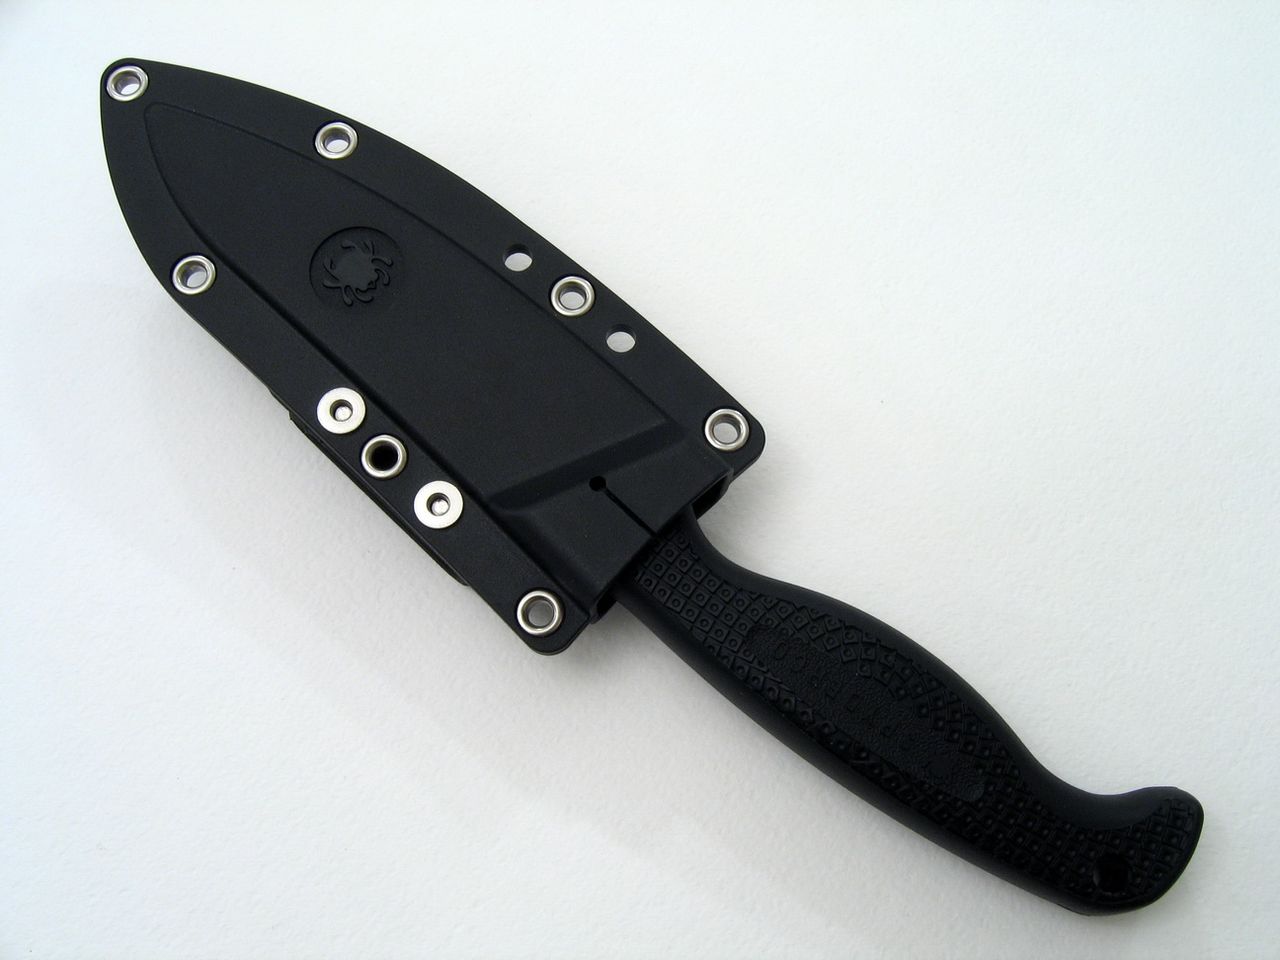 Crafted The Nylon Sheath Conveniently 120